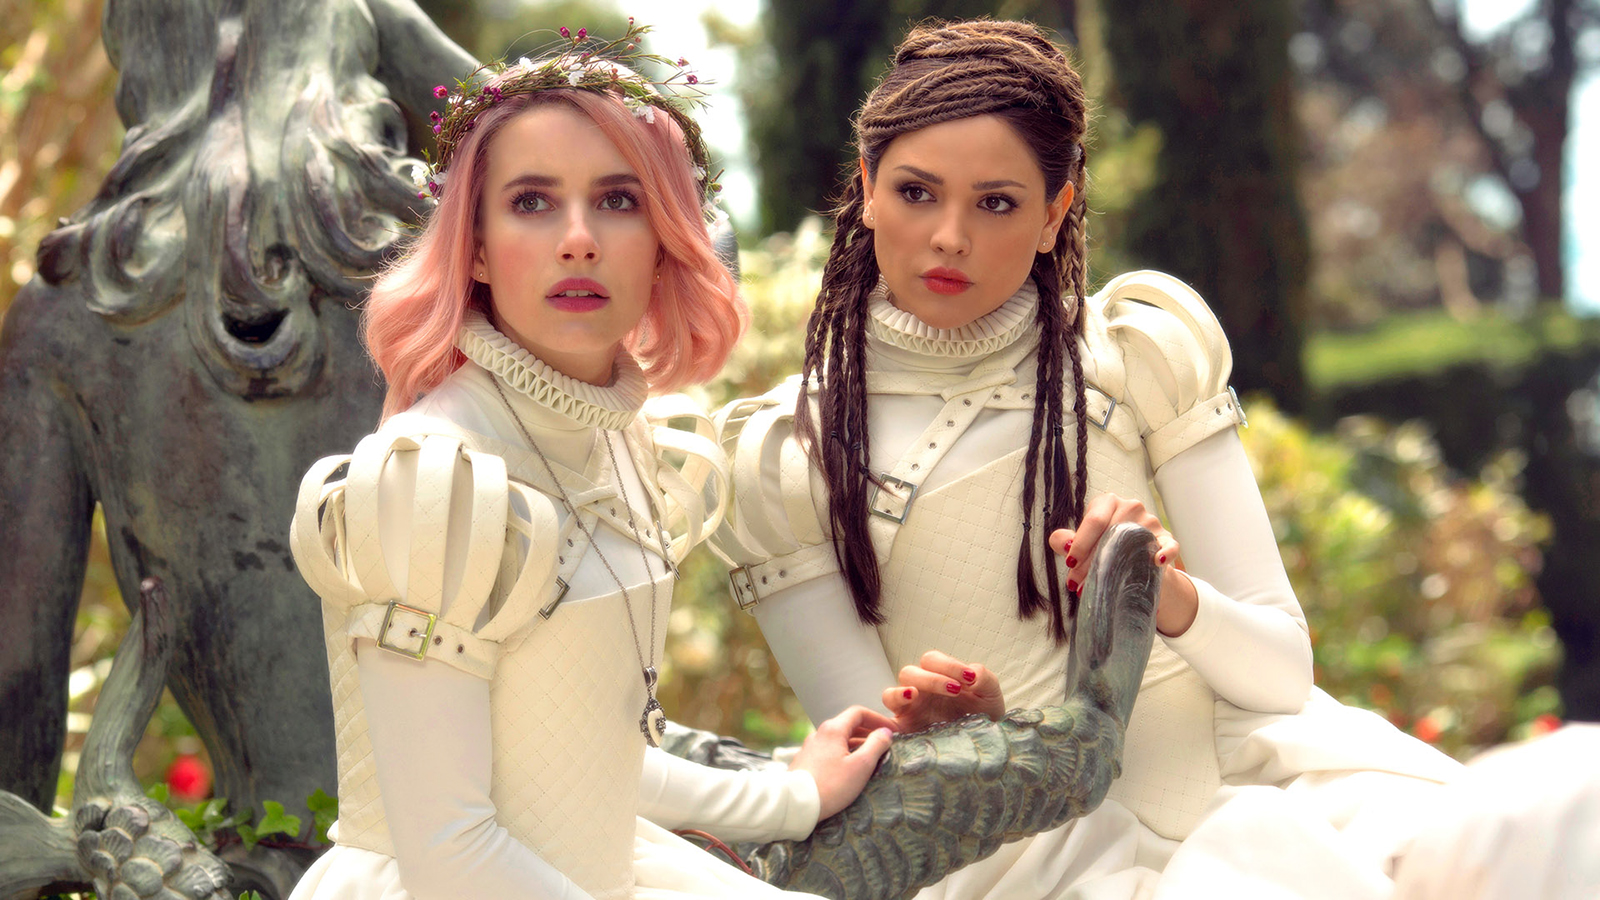 Movie review: Fantasy film 'Paradise Hills' features firm feminist  narrative - Daily Bruin